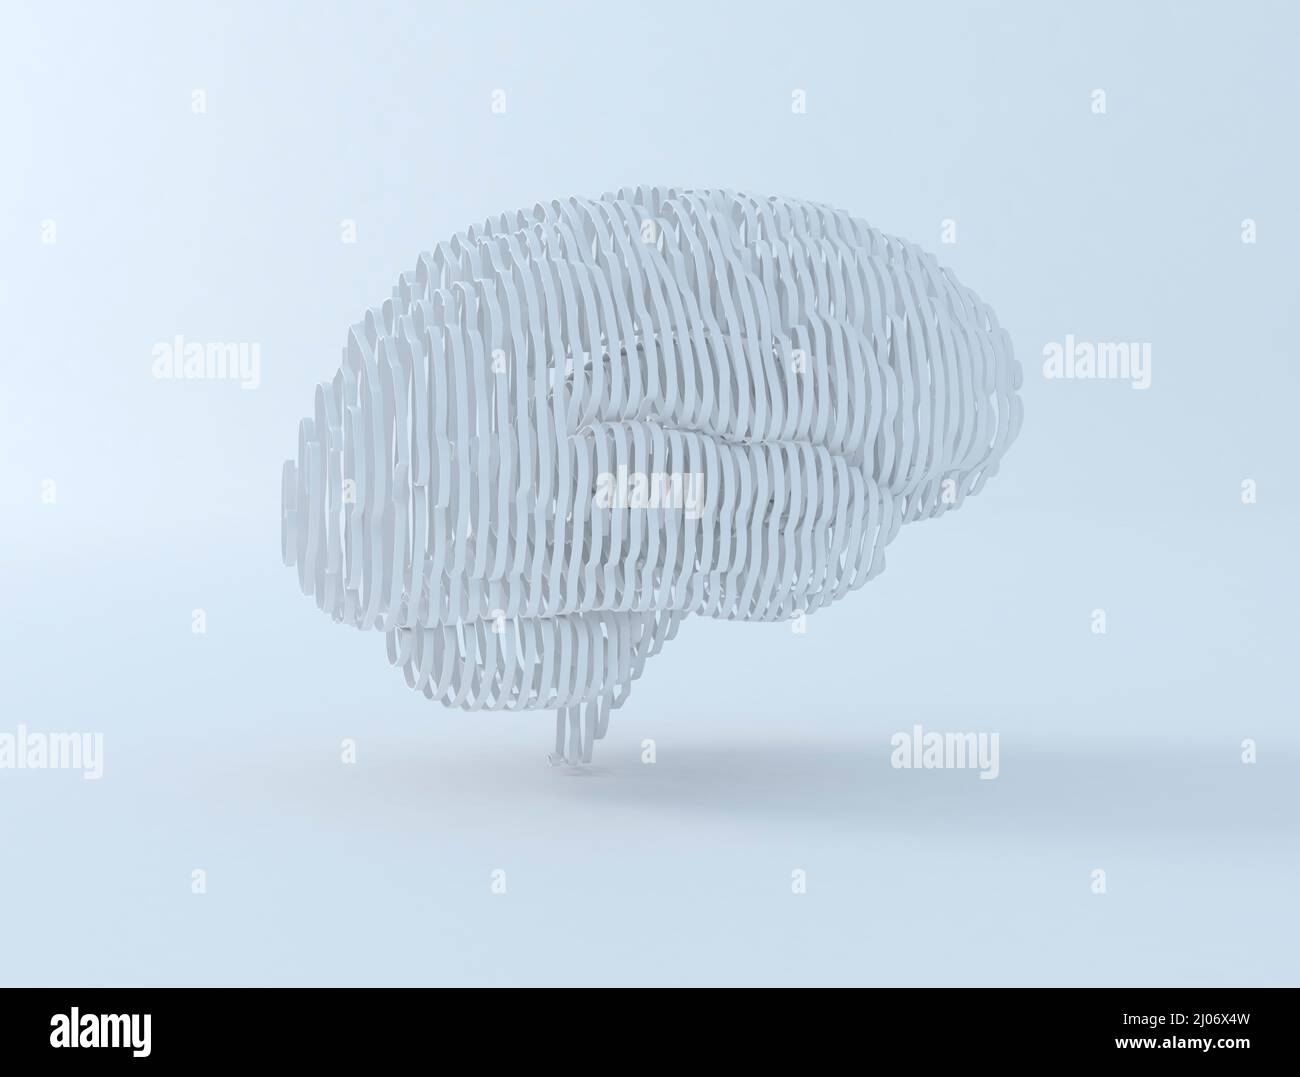 Abstract human brain. Small lines forming a brain shape 3d illustration Stock Photo